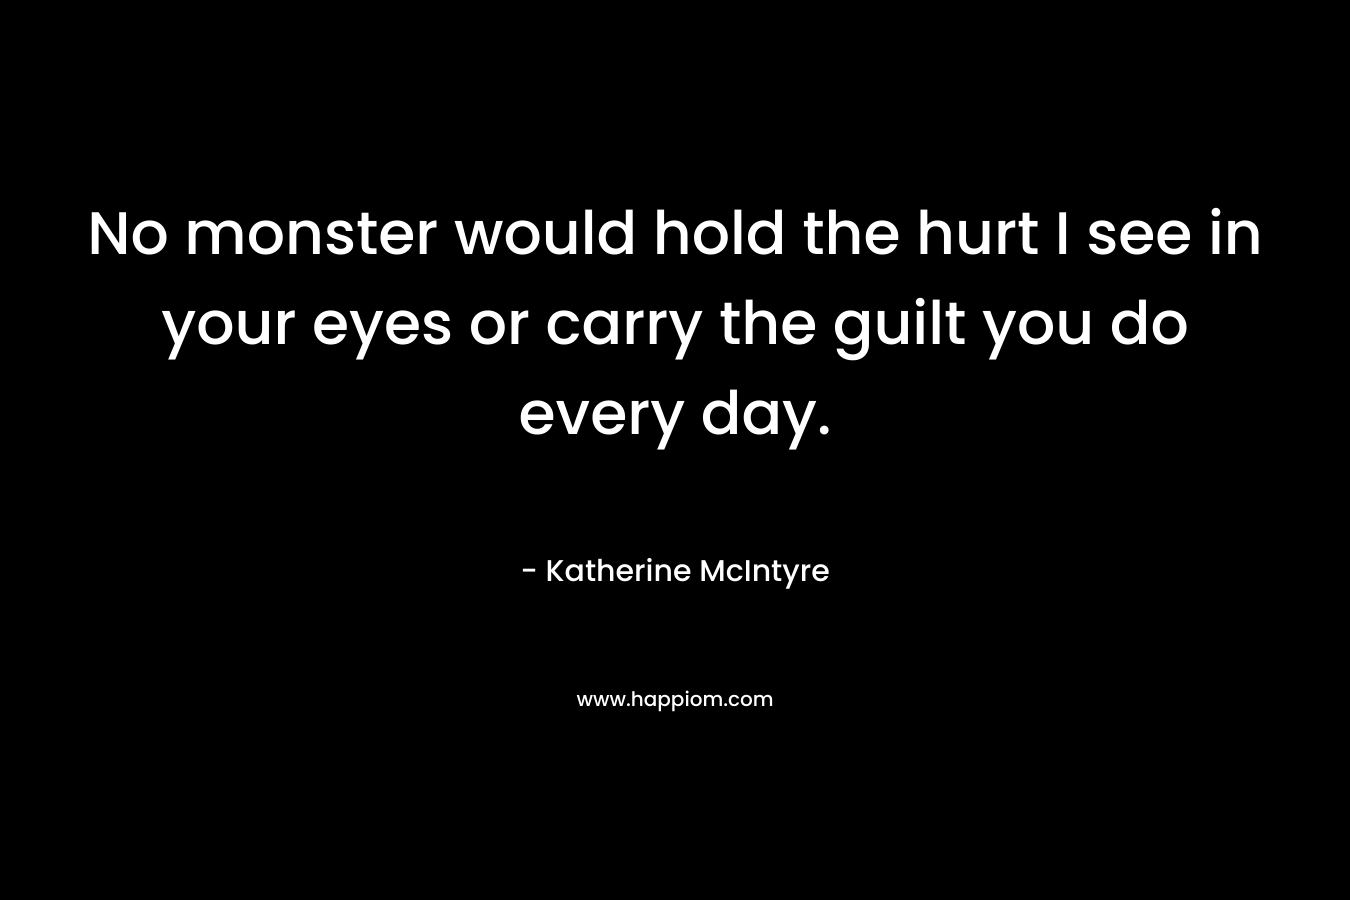 No monster would hold the hurt I see in your eyes or carry the guilt you do every day. – Katherine McIntyre